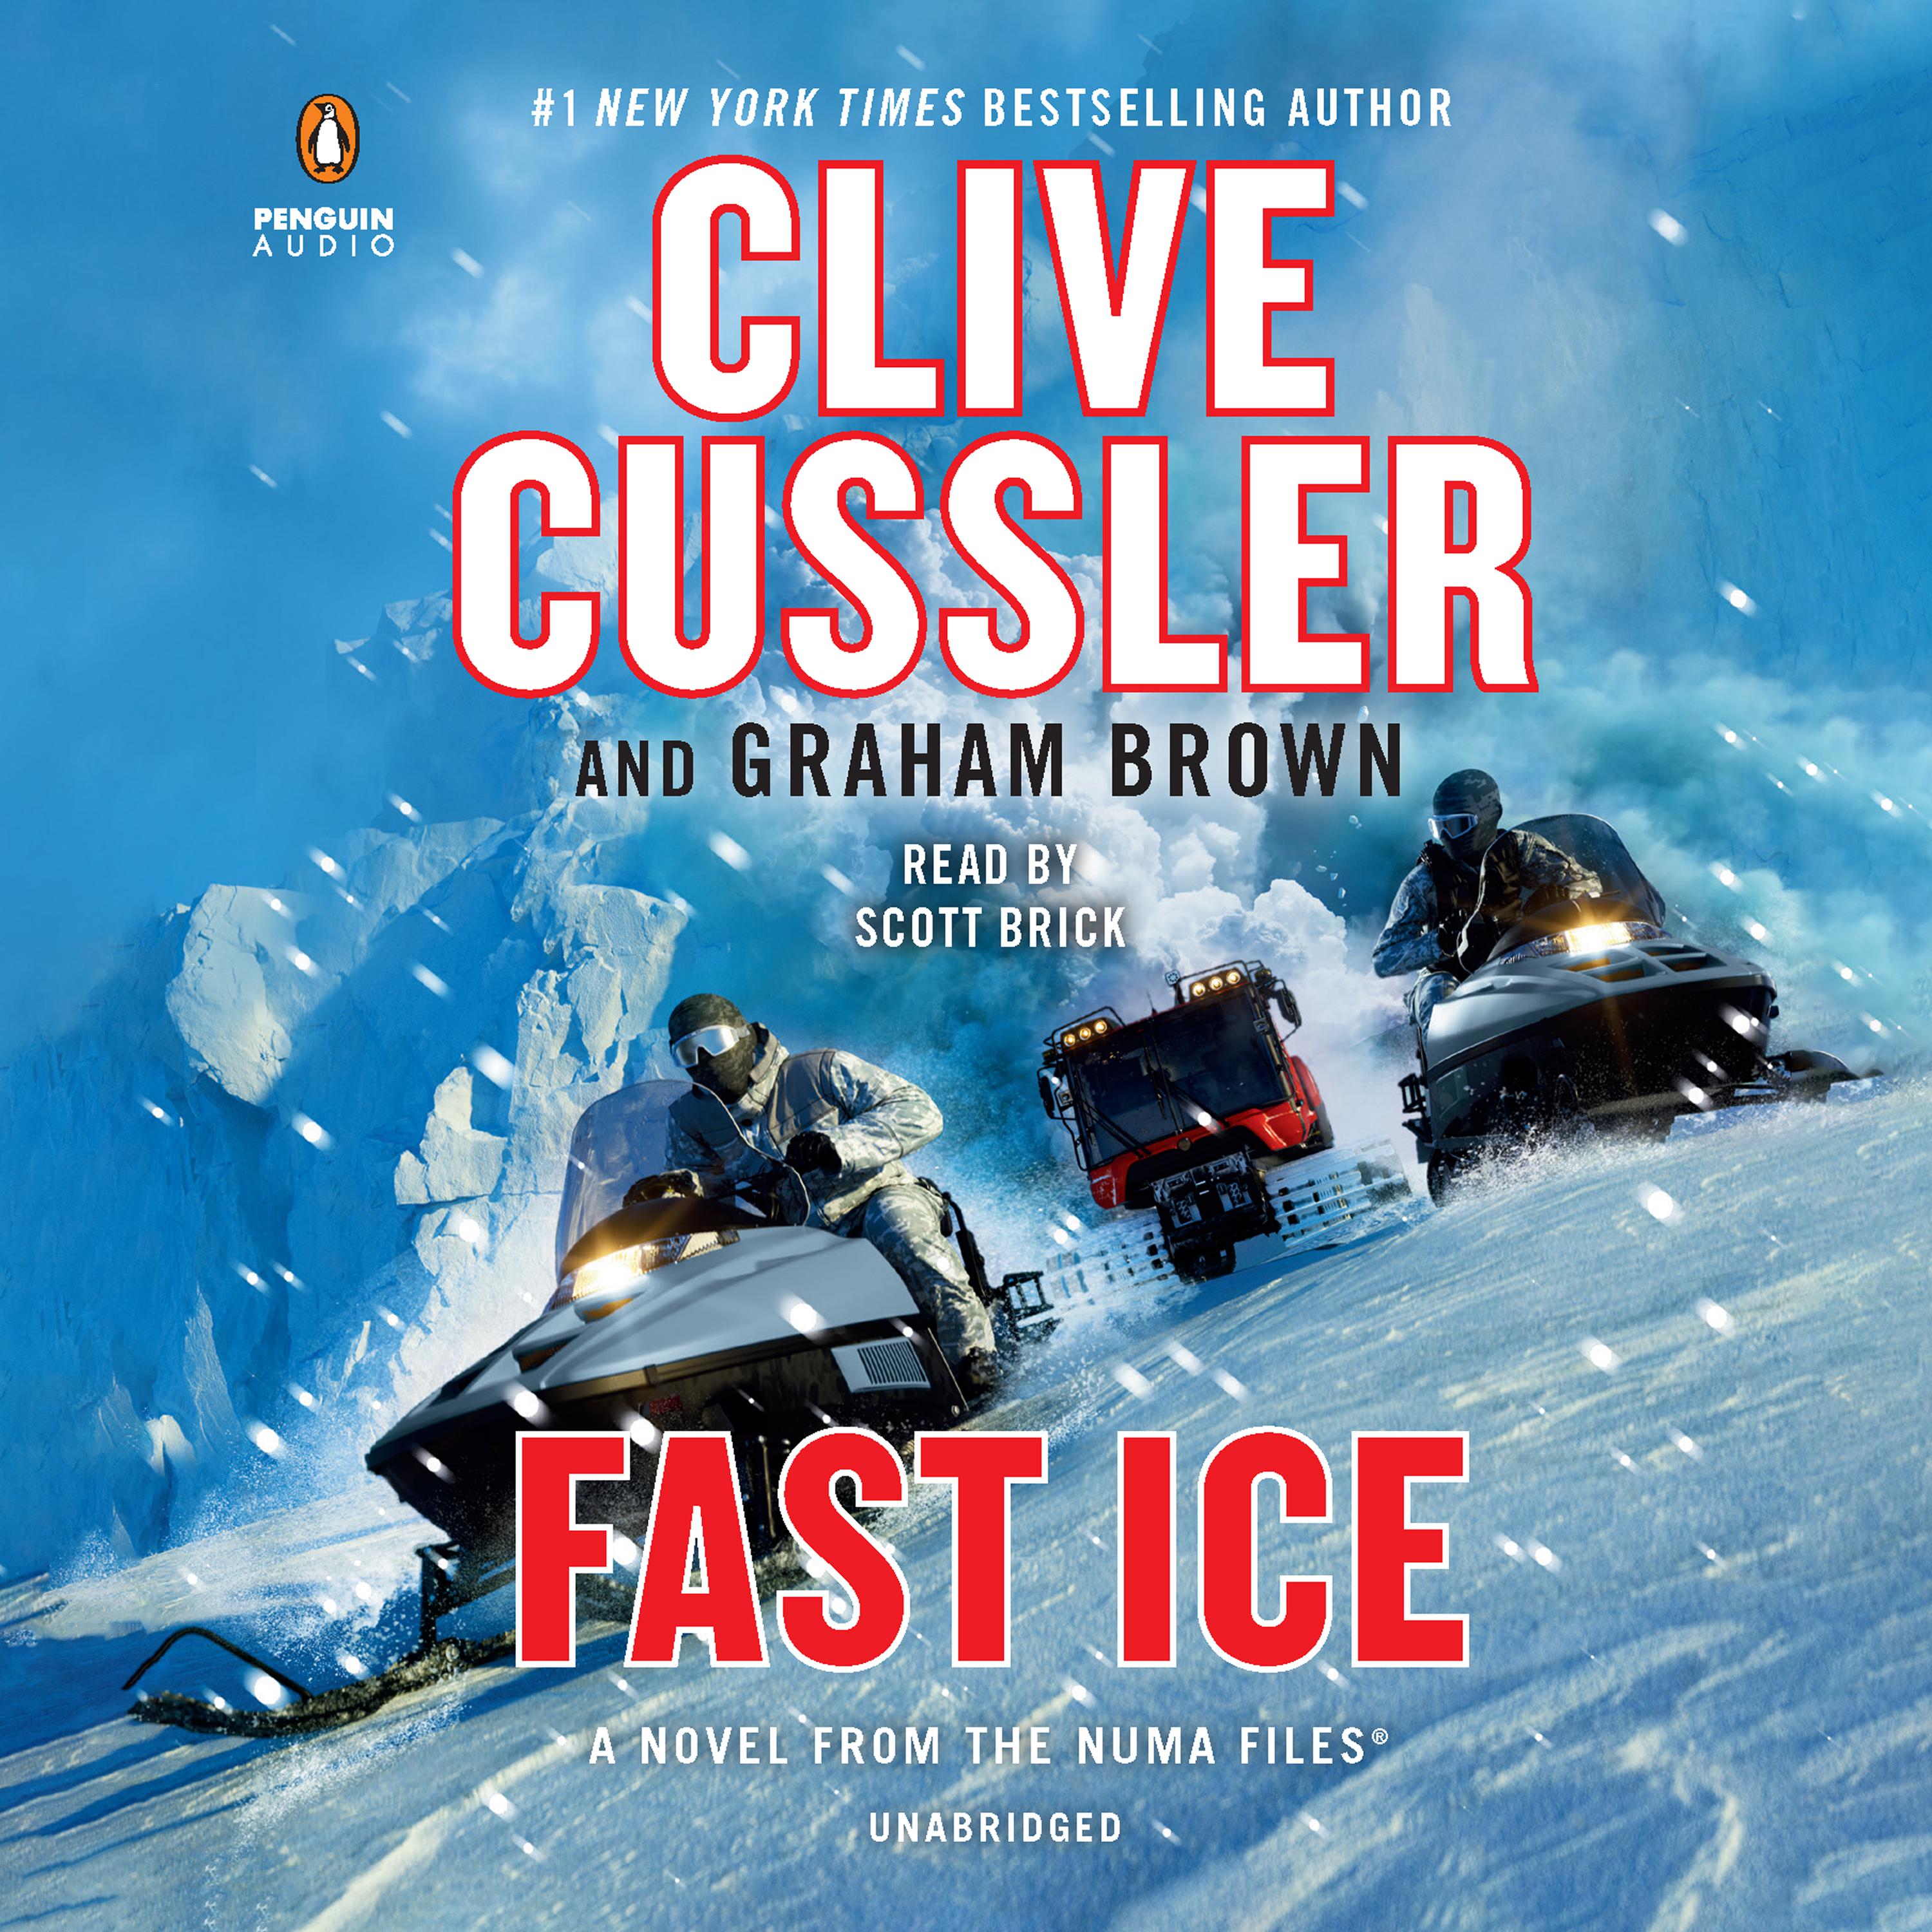 Fast ice. Cussler c. "Final option". Ice fastness.